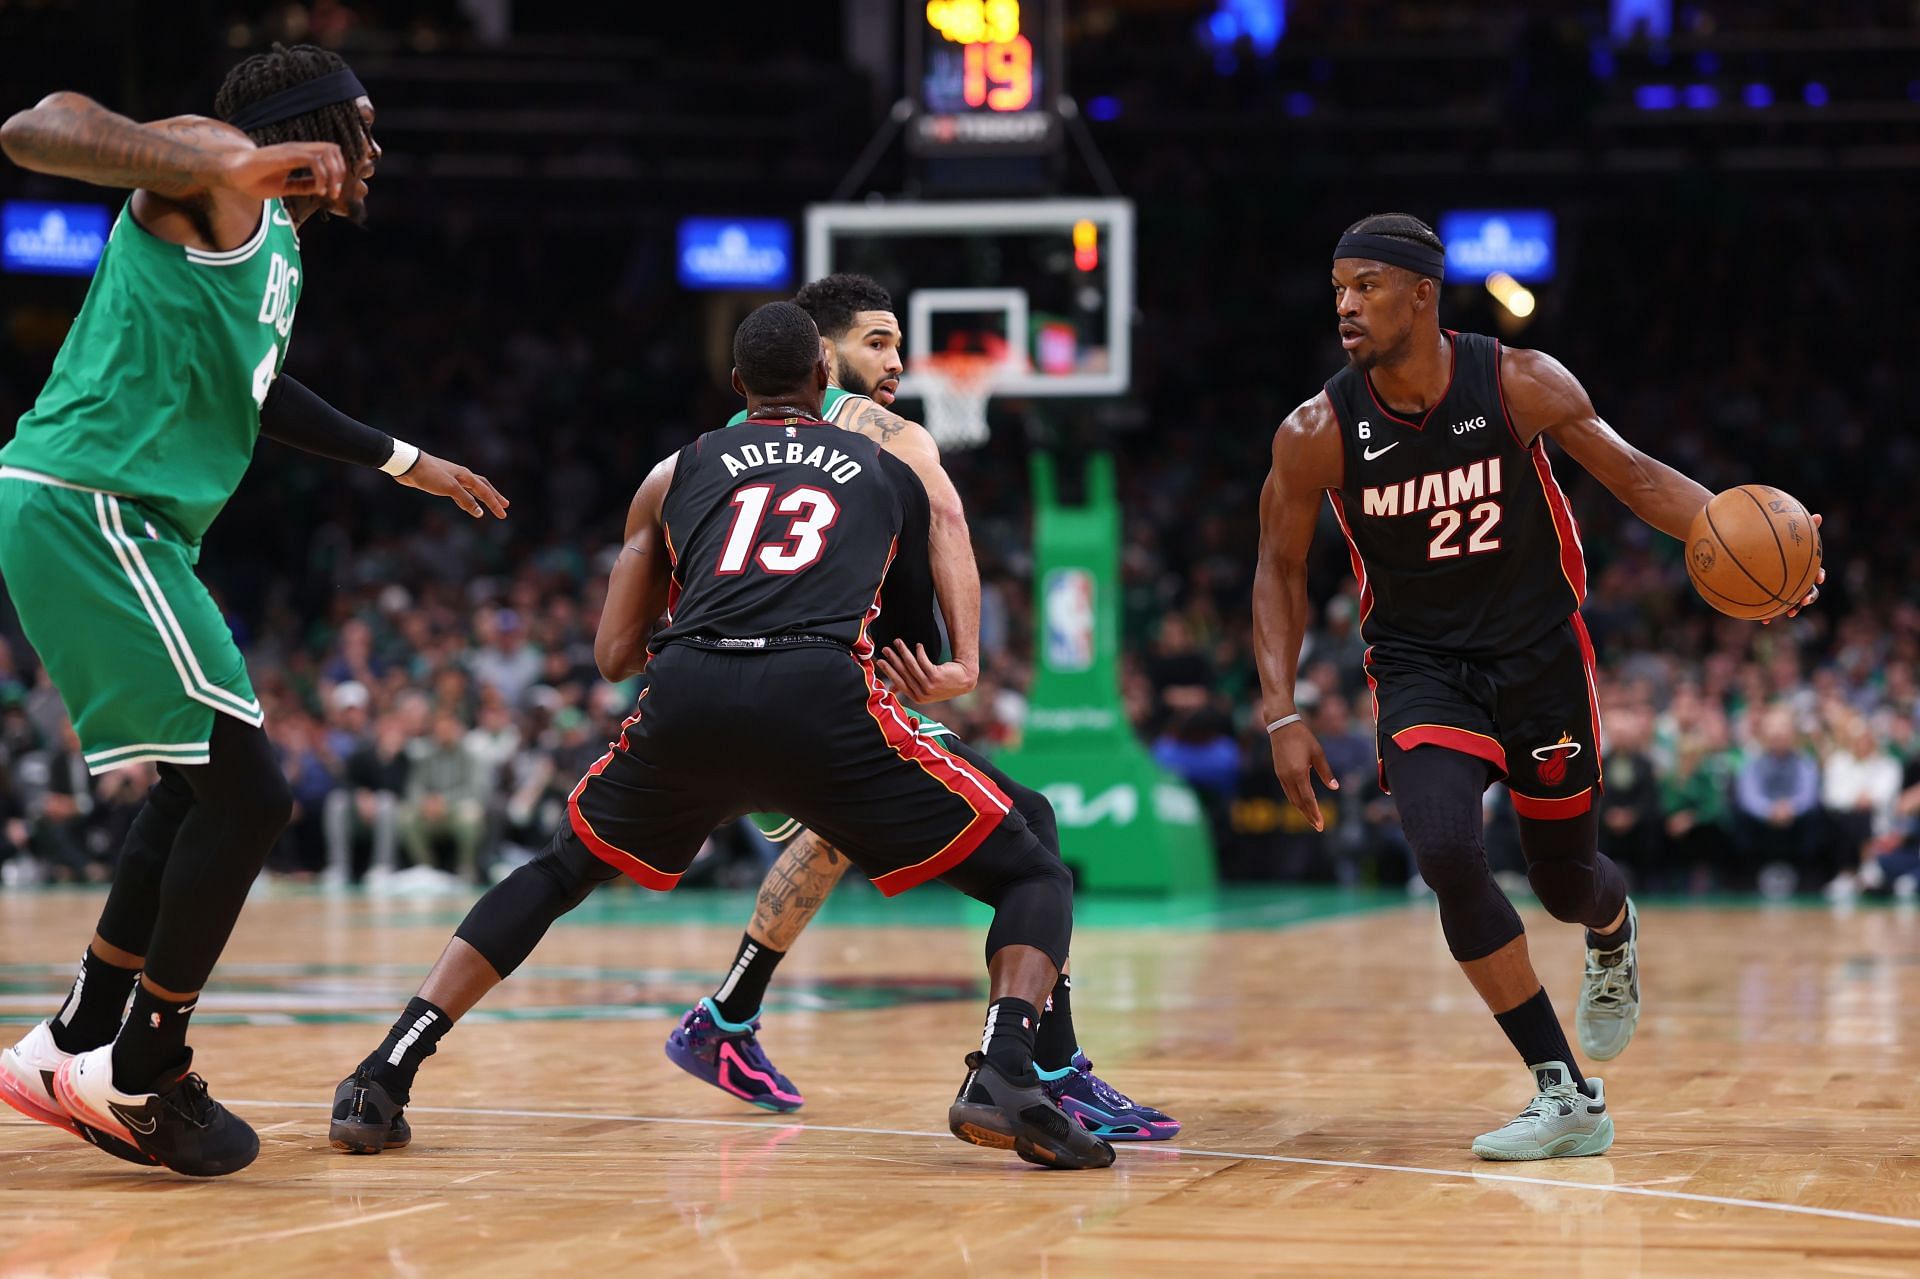 Bam Adebayo and Jimmy Butler are confident the Miami Heat will close out the series in Game 6.